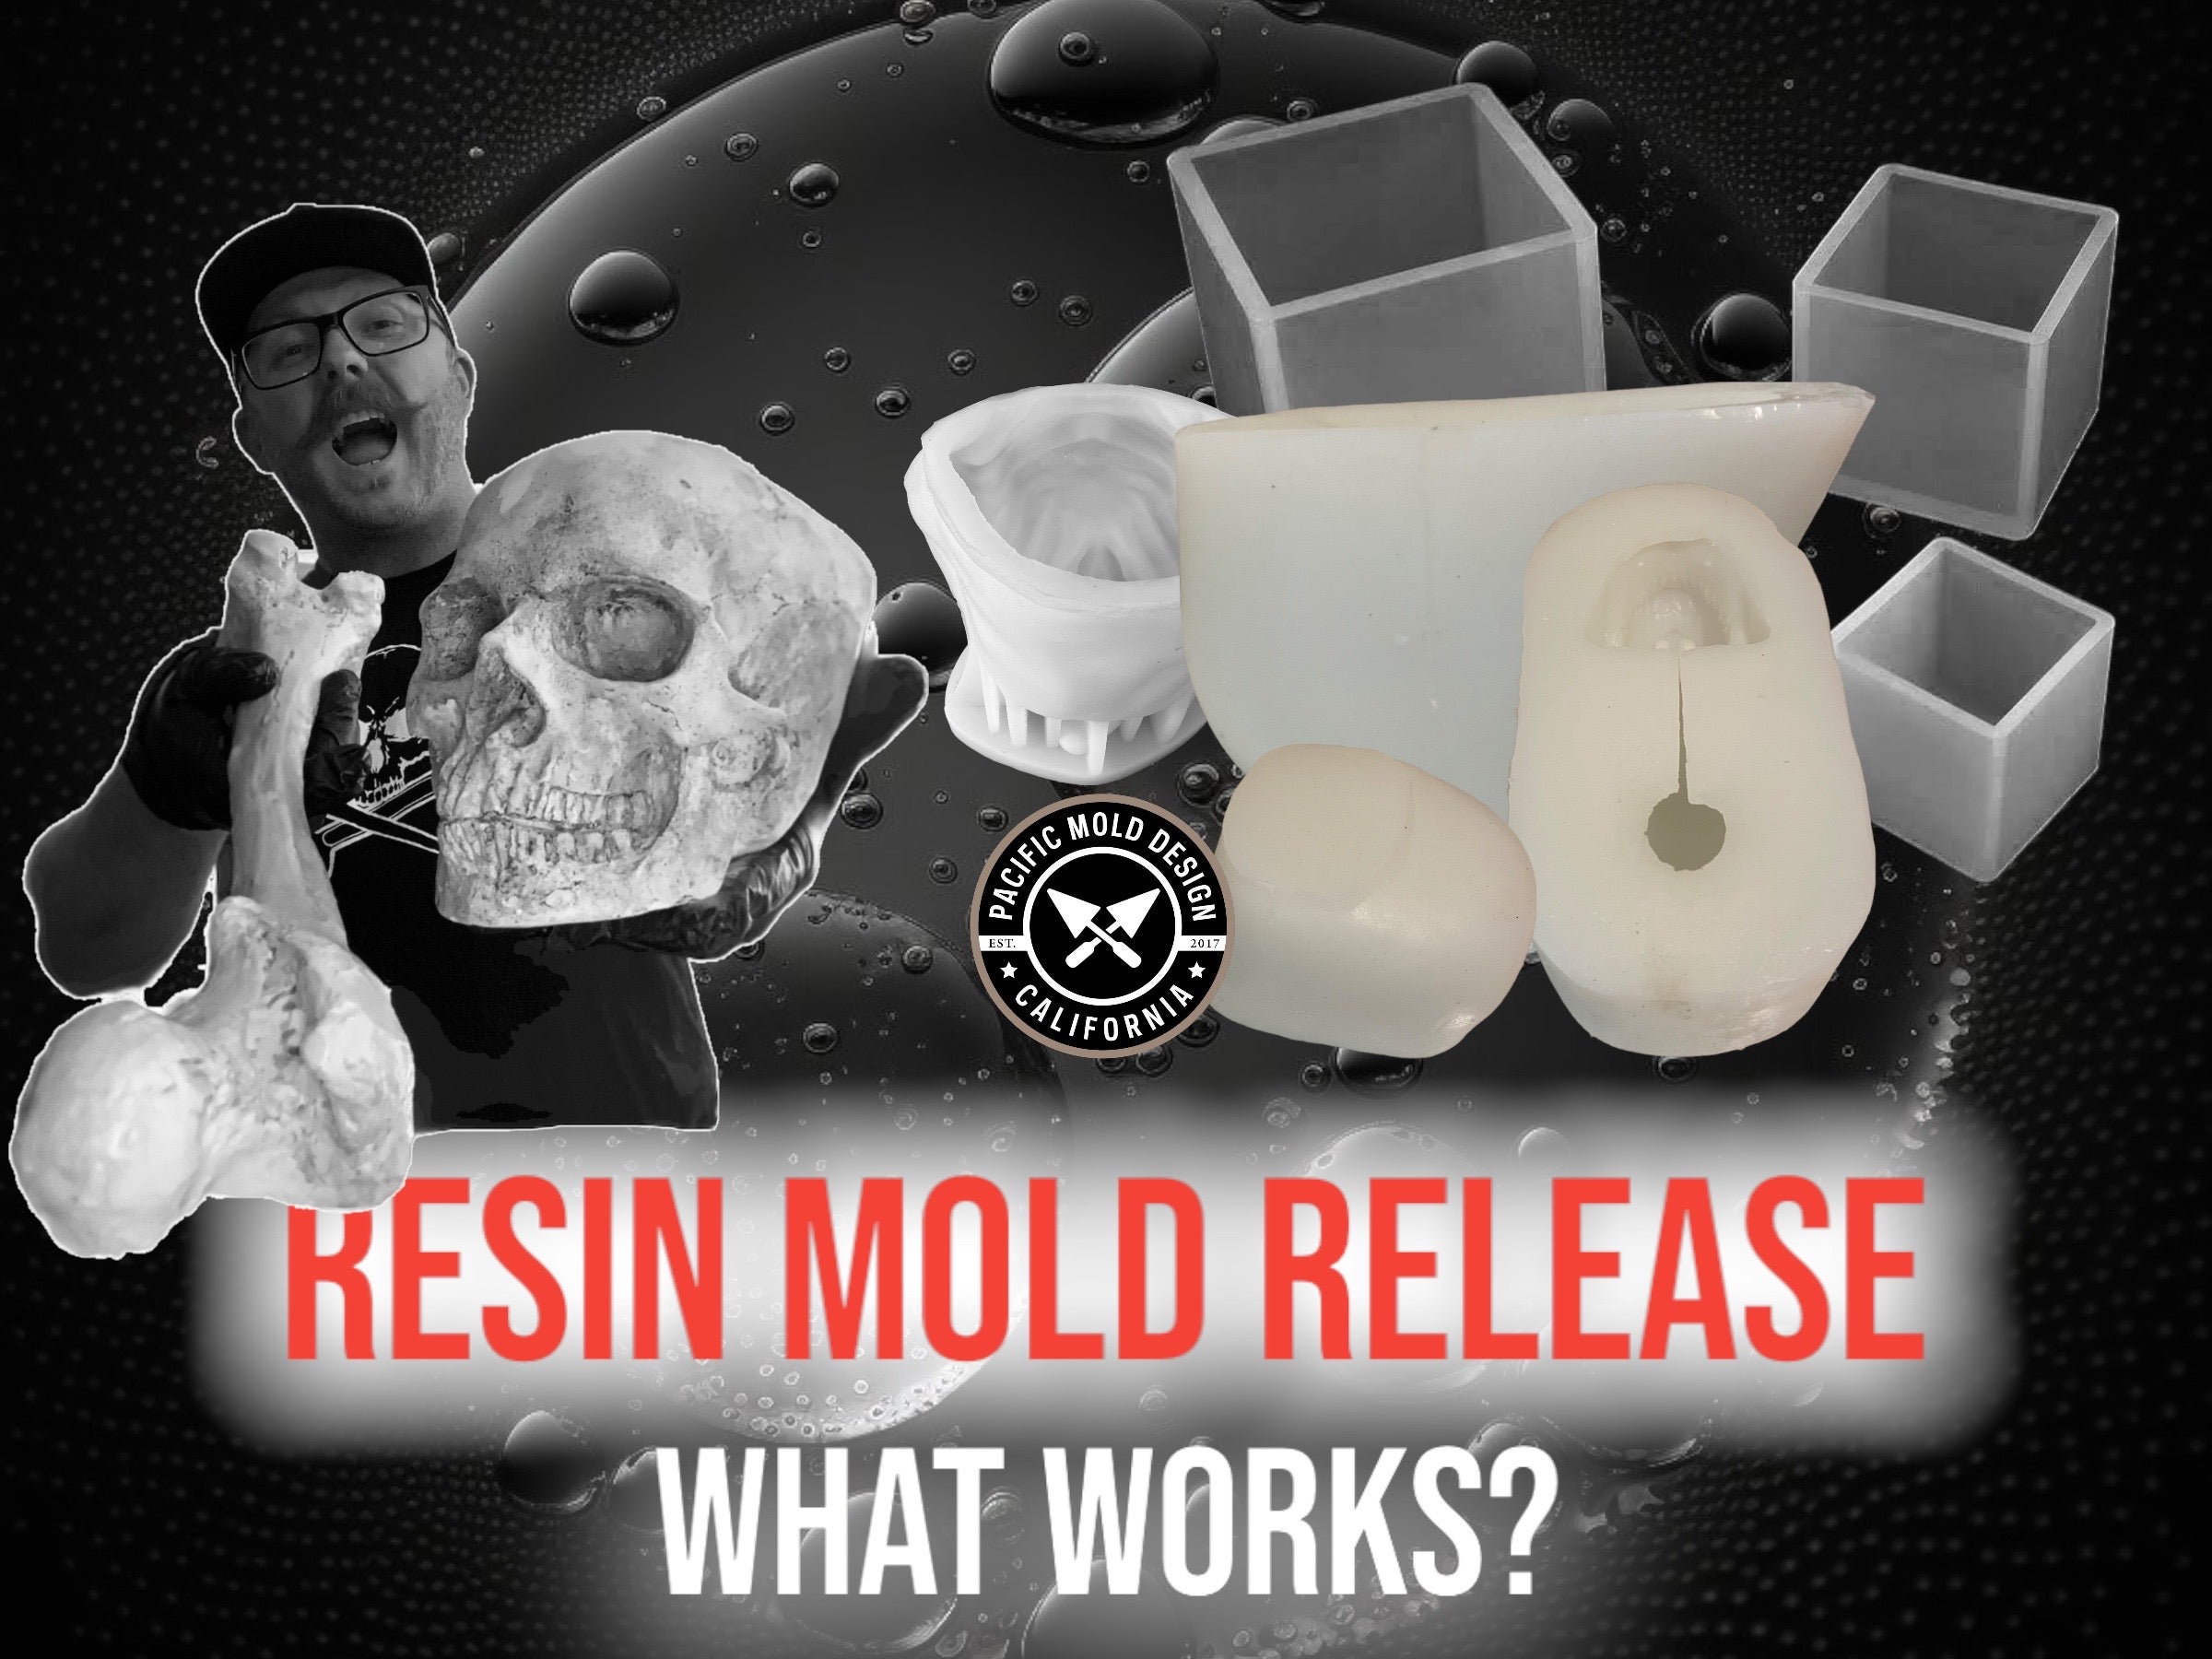 Universal Mold Release